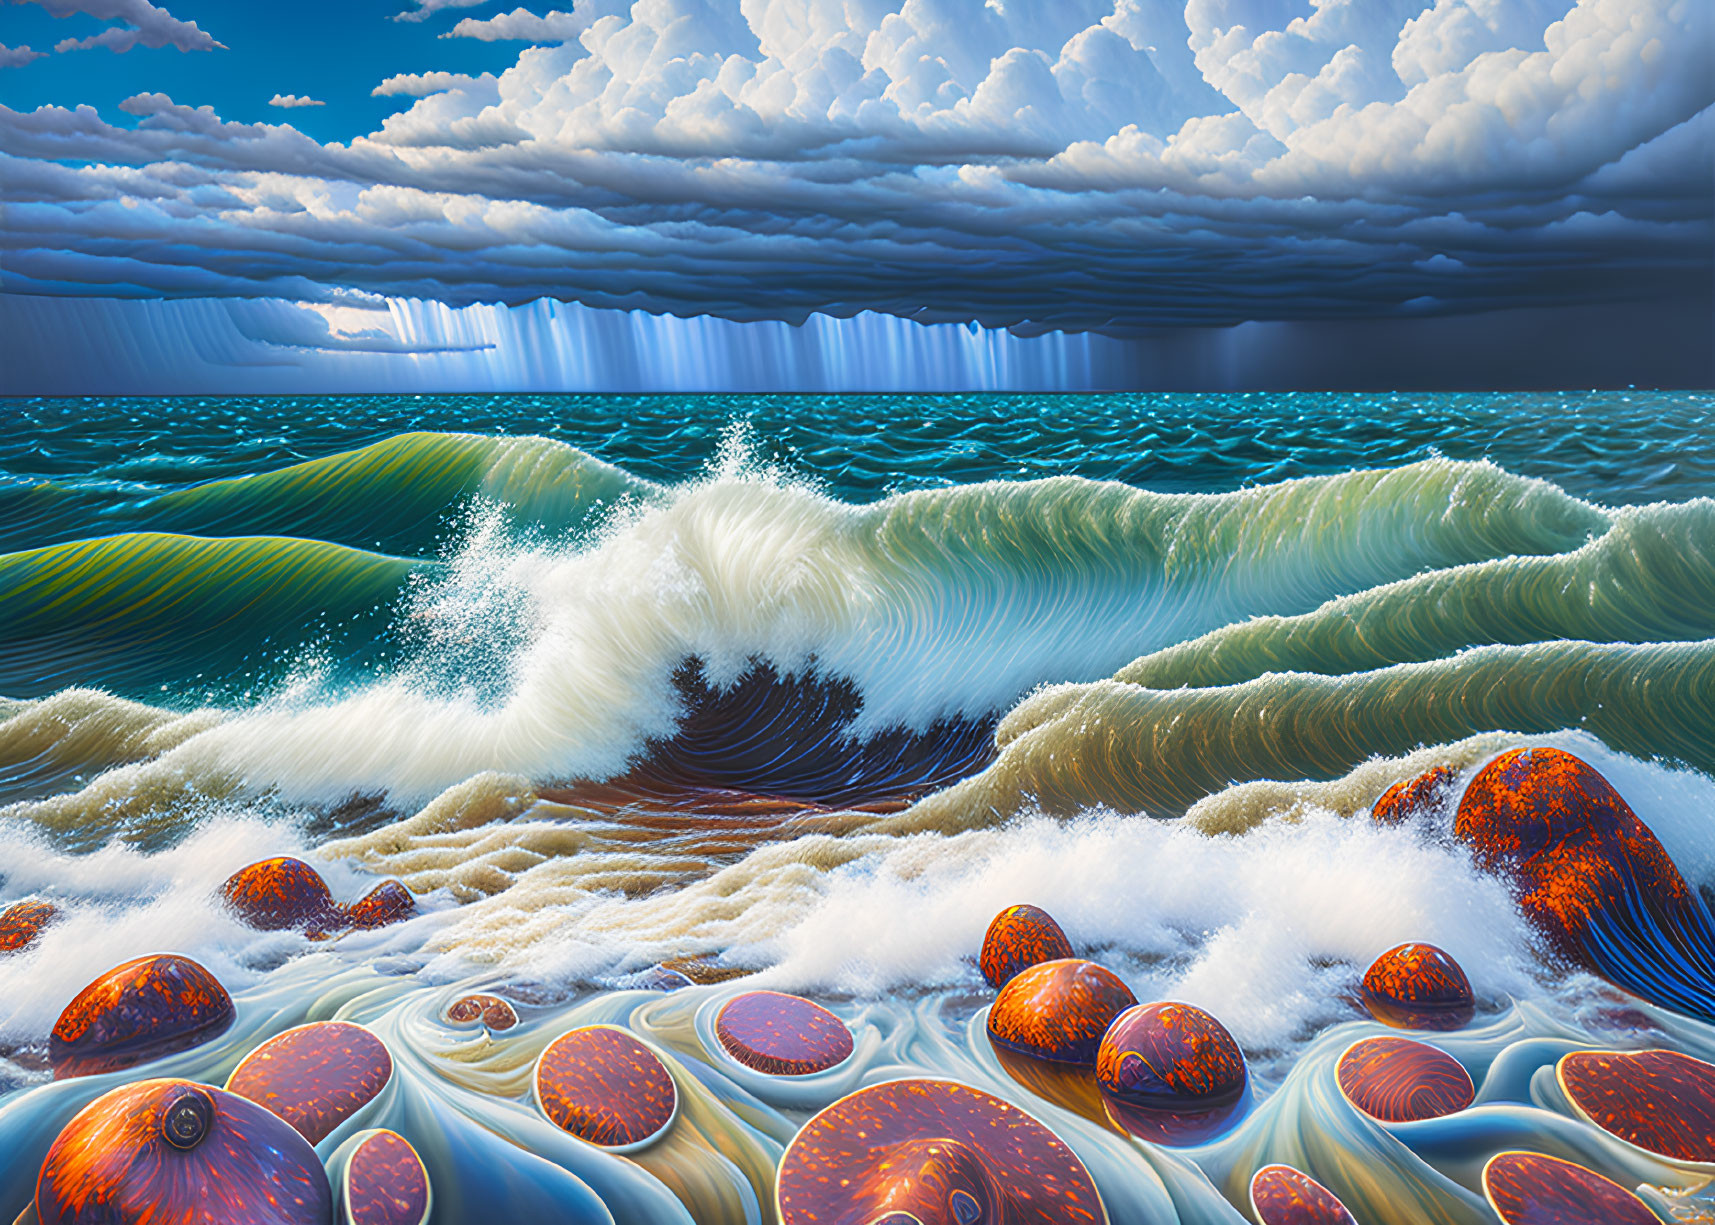 Surreal seascape with cosmic sky, planets, and shell-like spheres